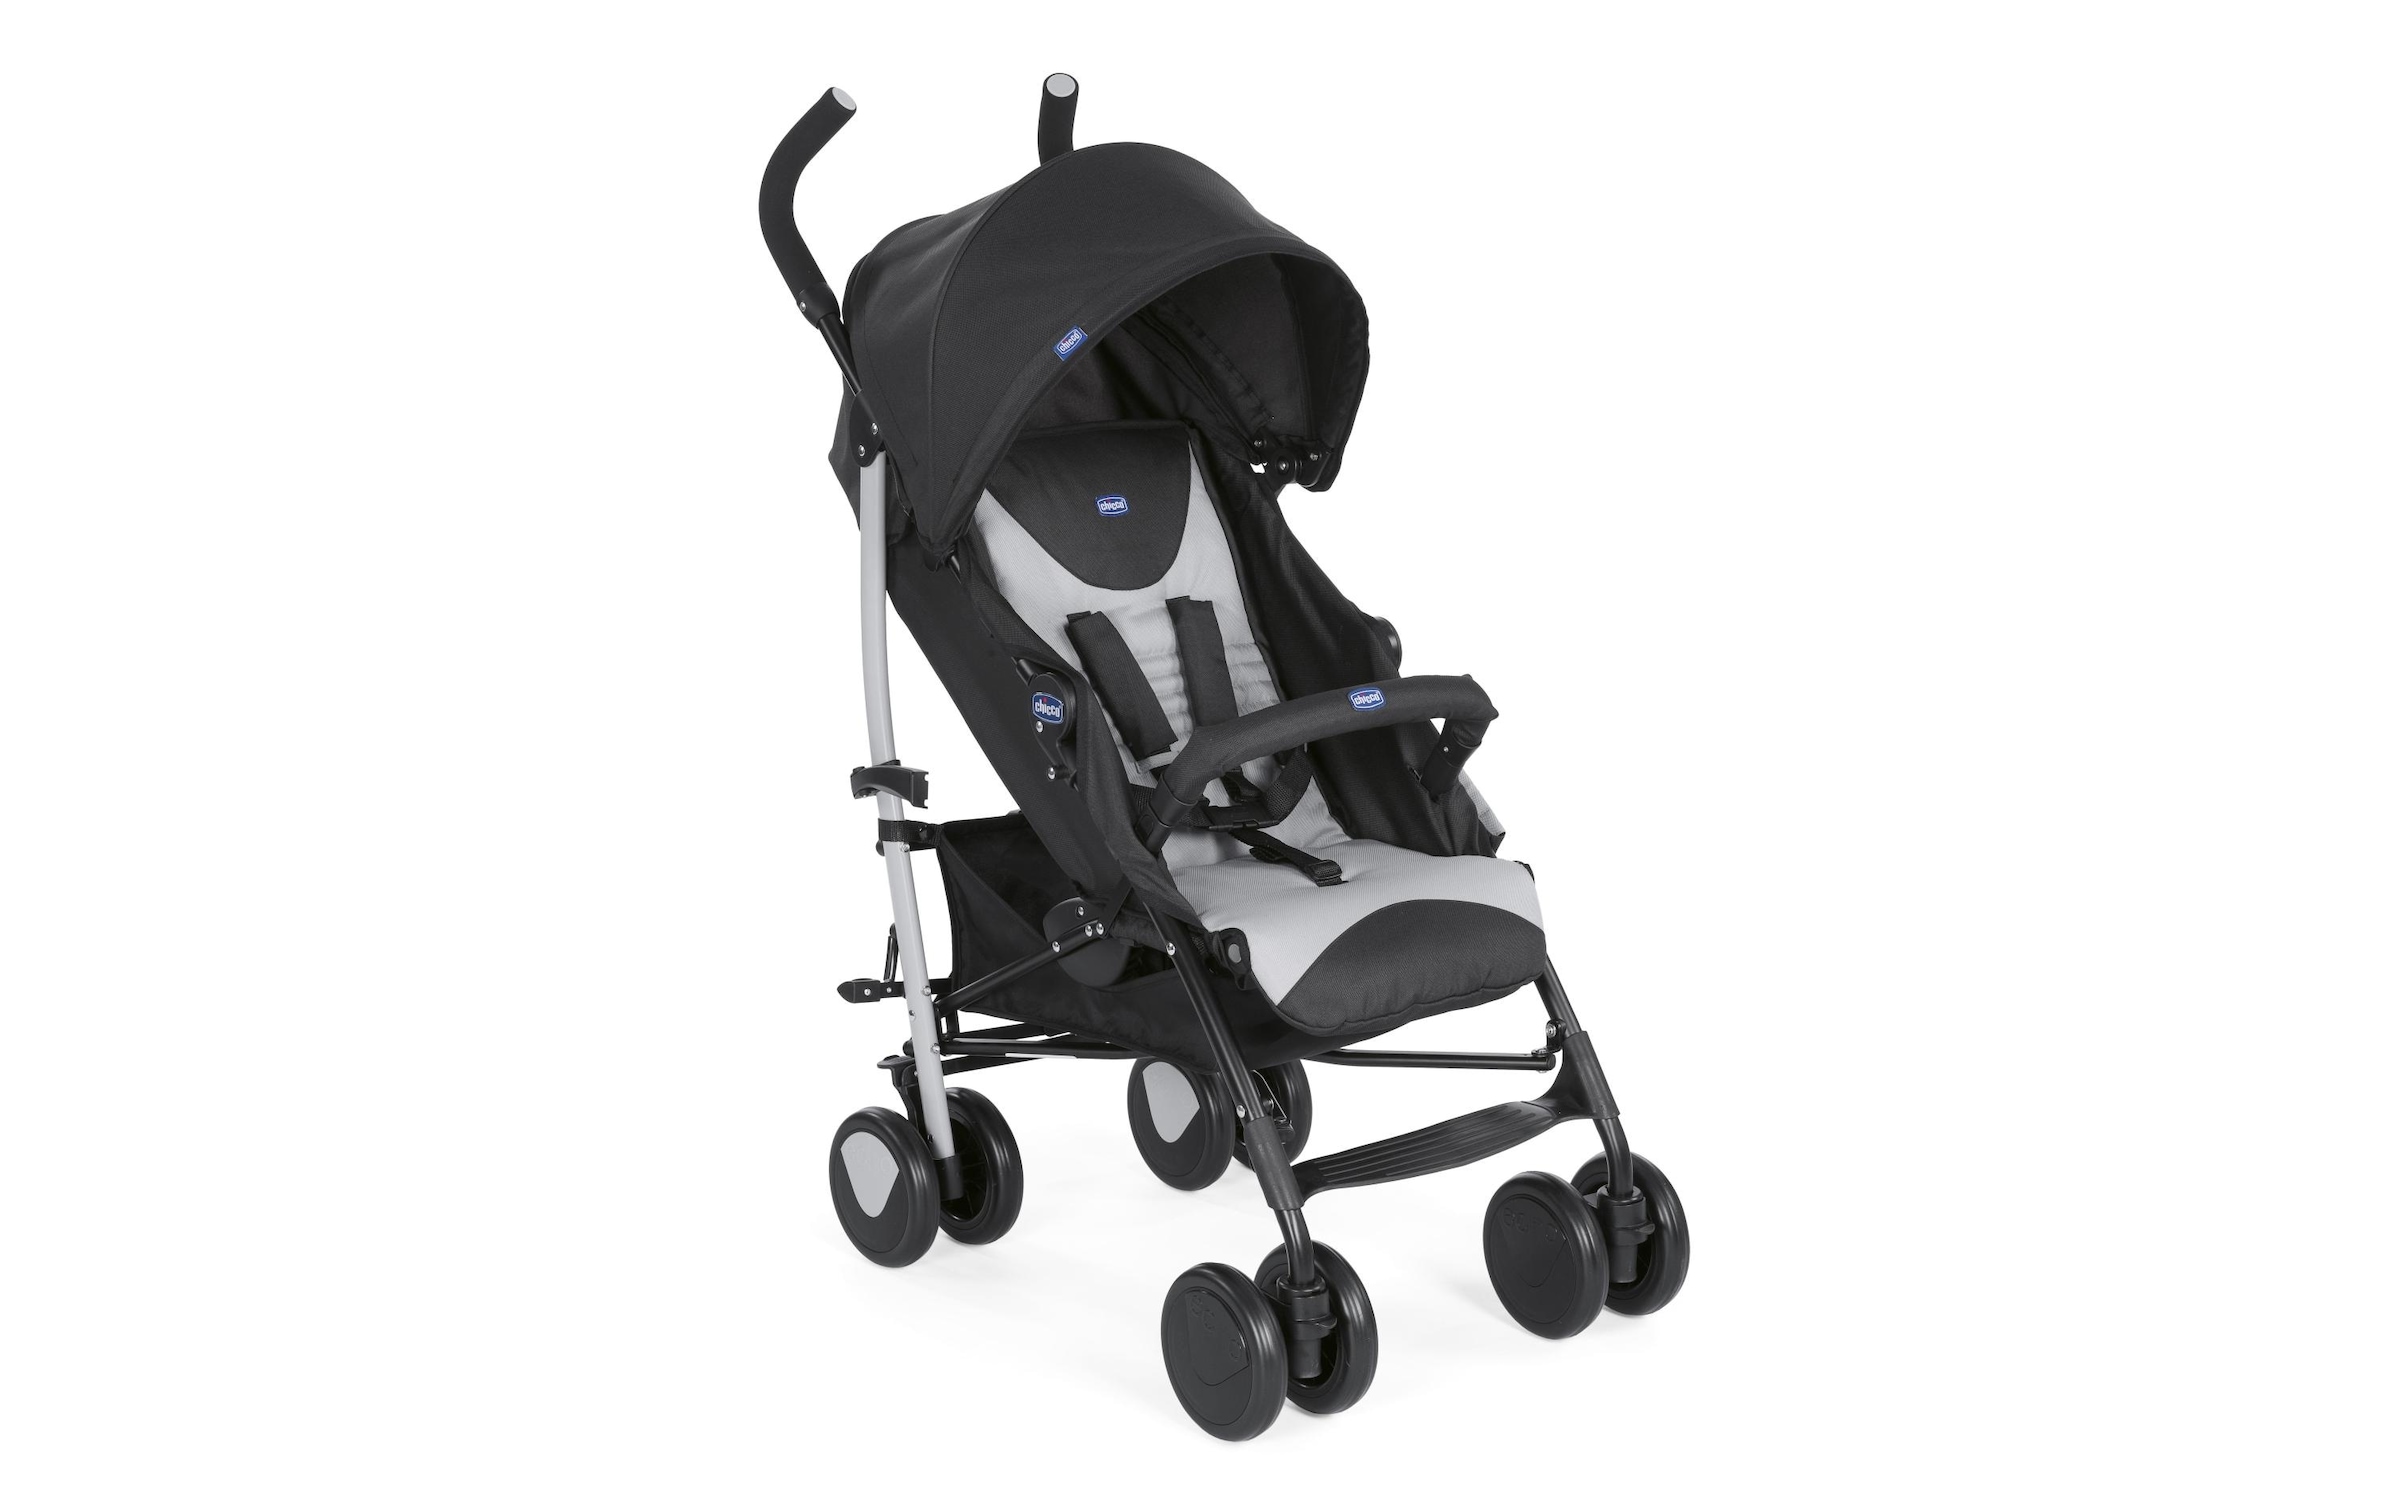 Chicco Kinder-Buggy »Chicco Buggy Echo«, 22 kg